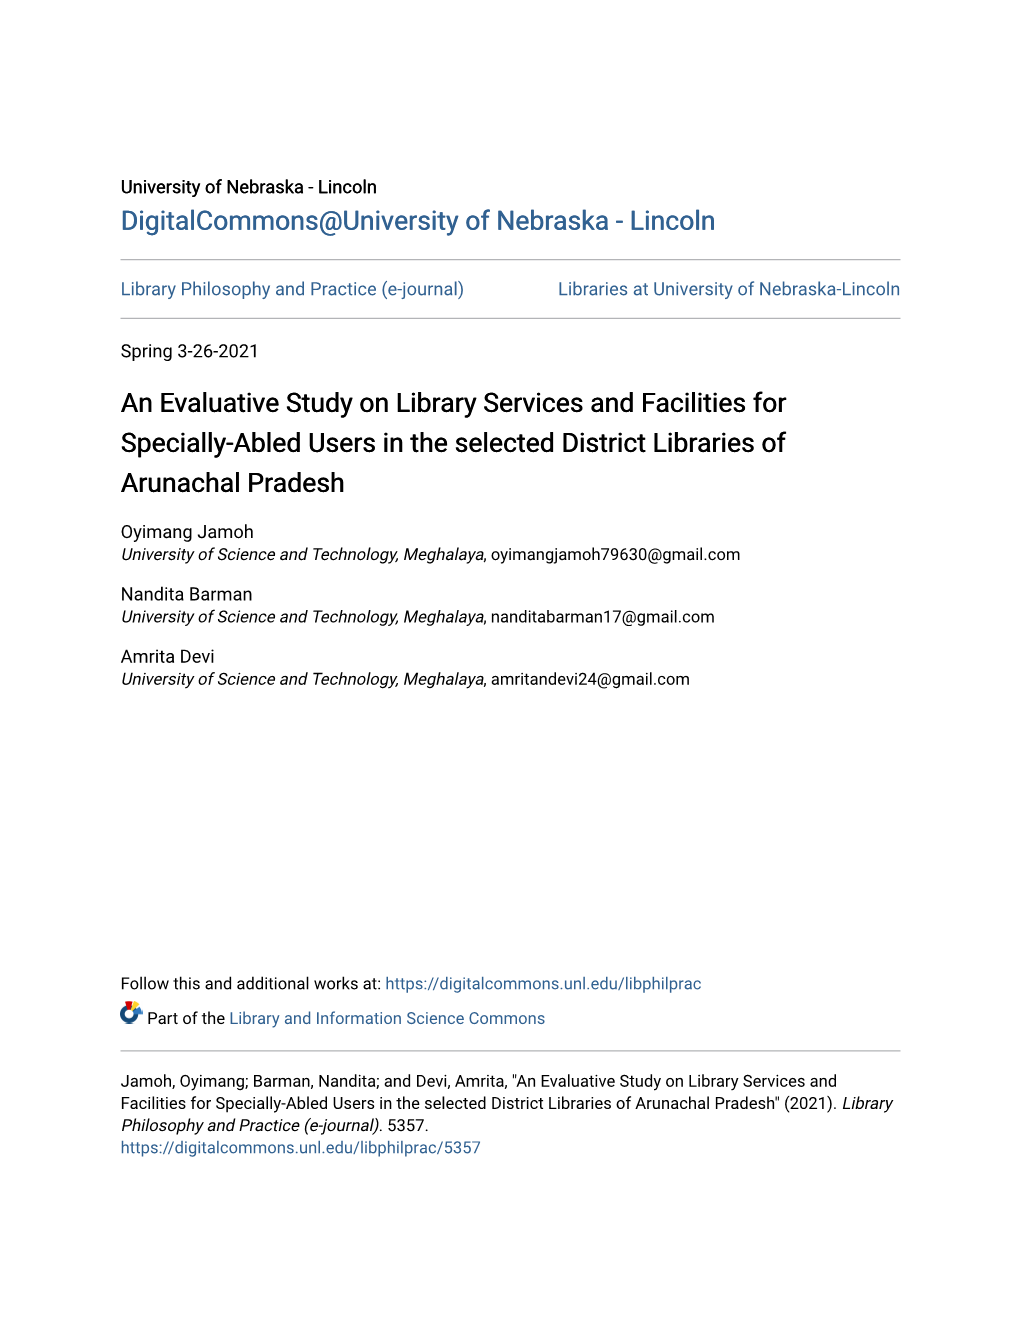 An Evaluative Study on Library Services and Facilities for Specially-Abled Users in the Selected District Libraries of Arunachal Pradesh